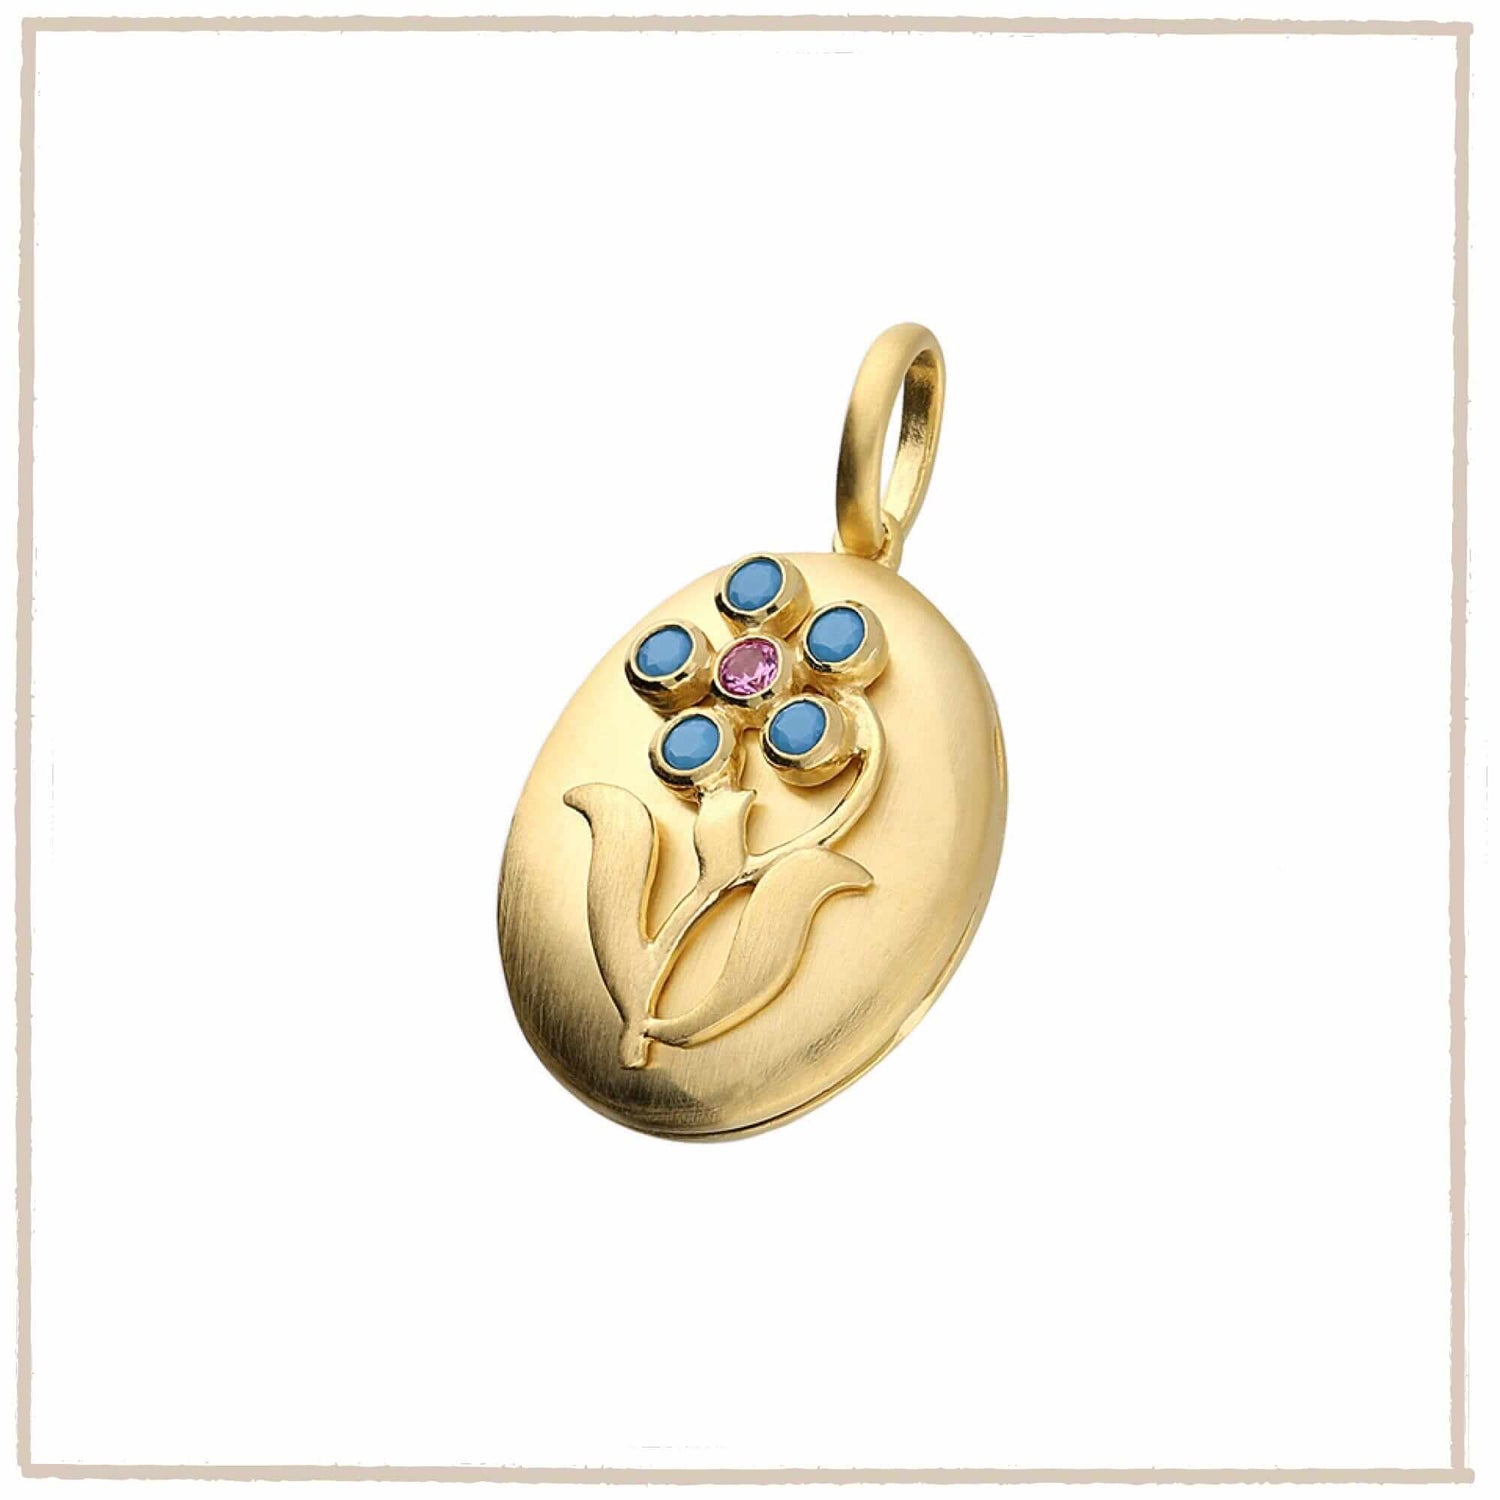 Gold Vermeil & 925 sterling silver jewellery collections at Twelve Silver Trees Jewellery & Gifts